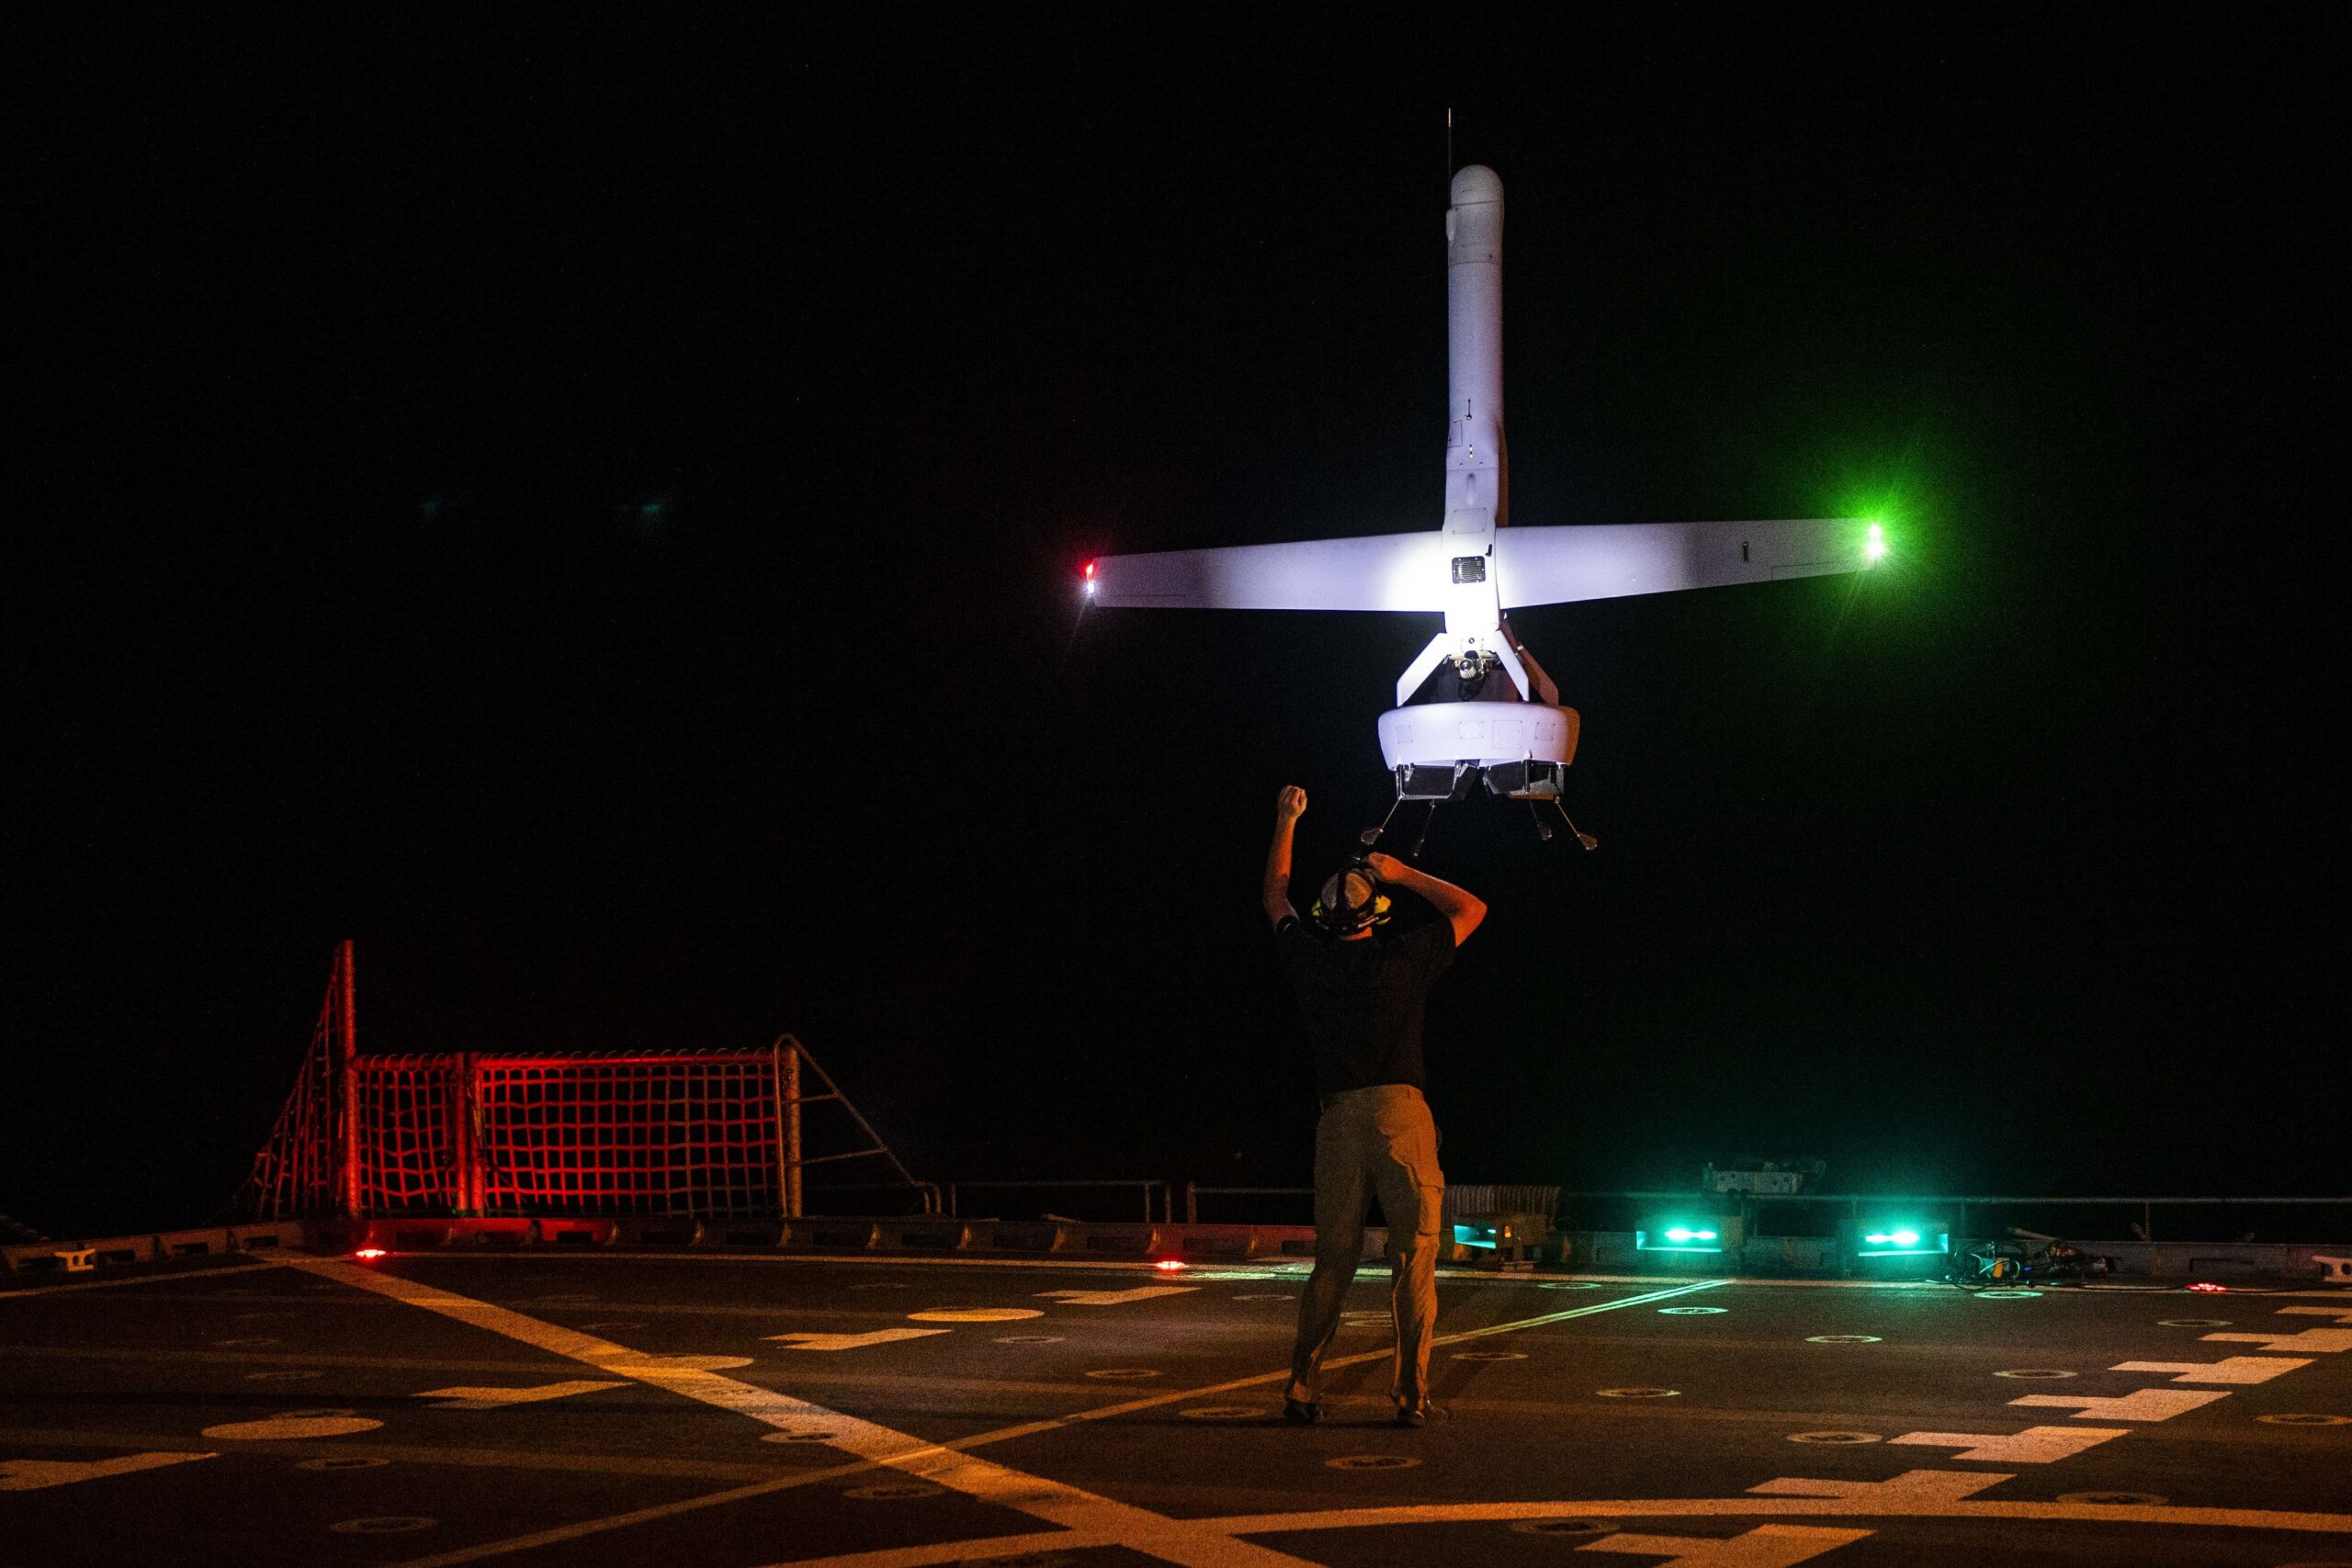 A VBAT vertical take-off and landing (VTOL) unmanned aerial system (UAS) prepares to land on the flight deck of the Military Sealift Command expeditionary fast transport vessel USNS Spearhead